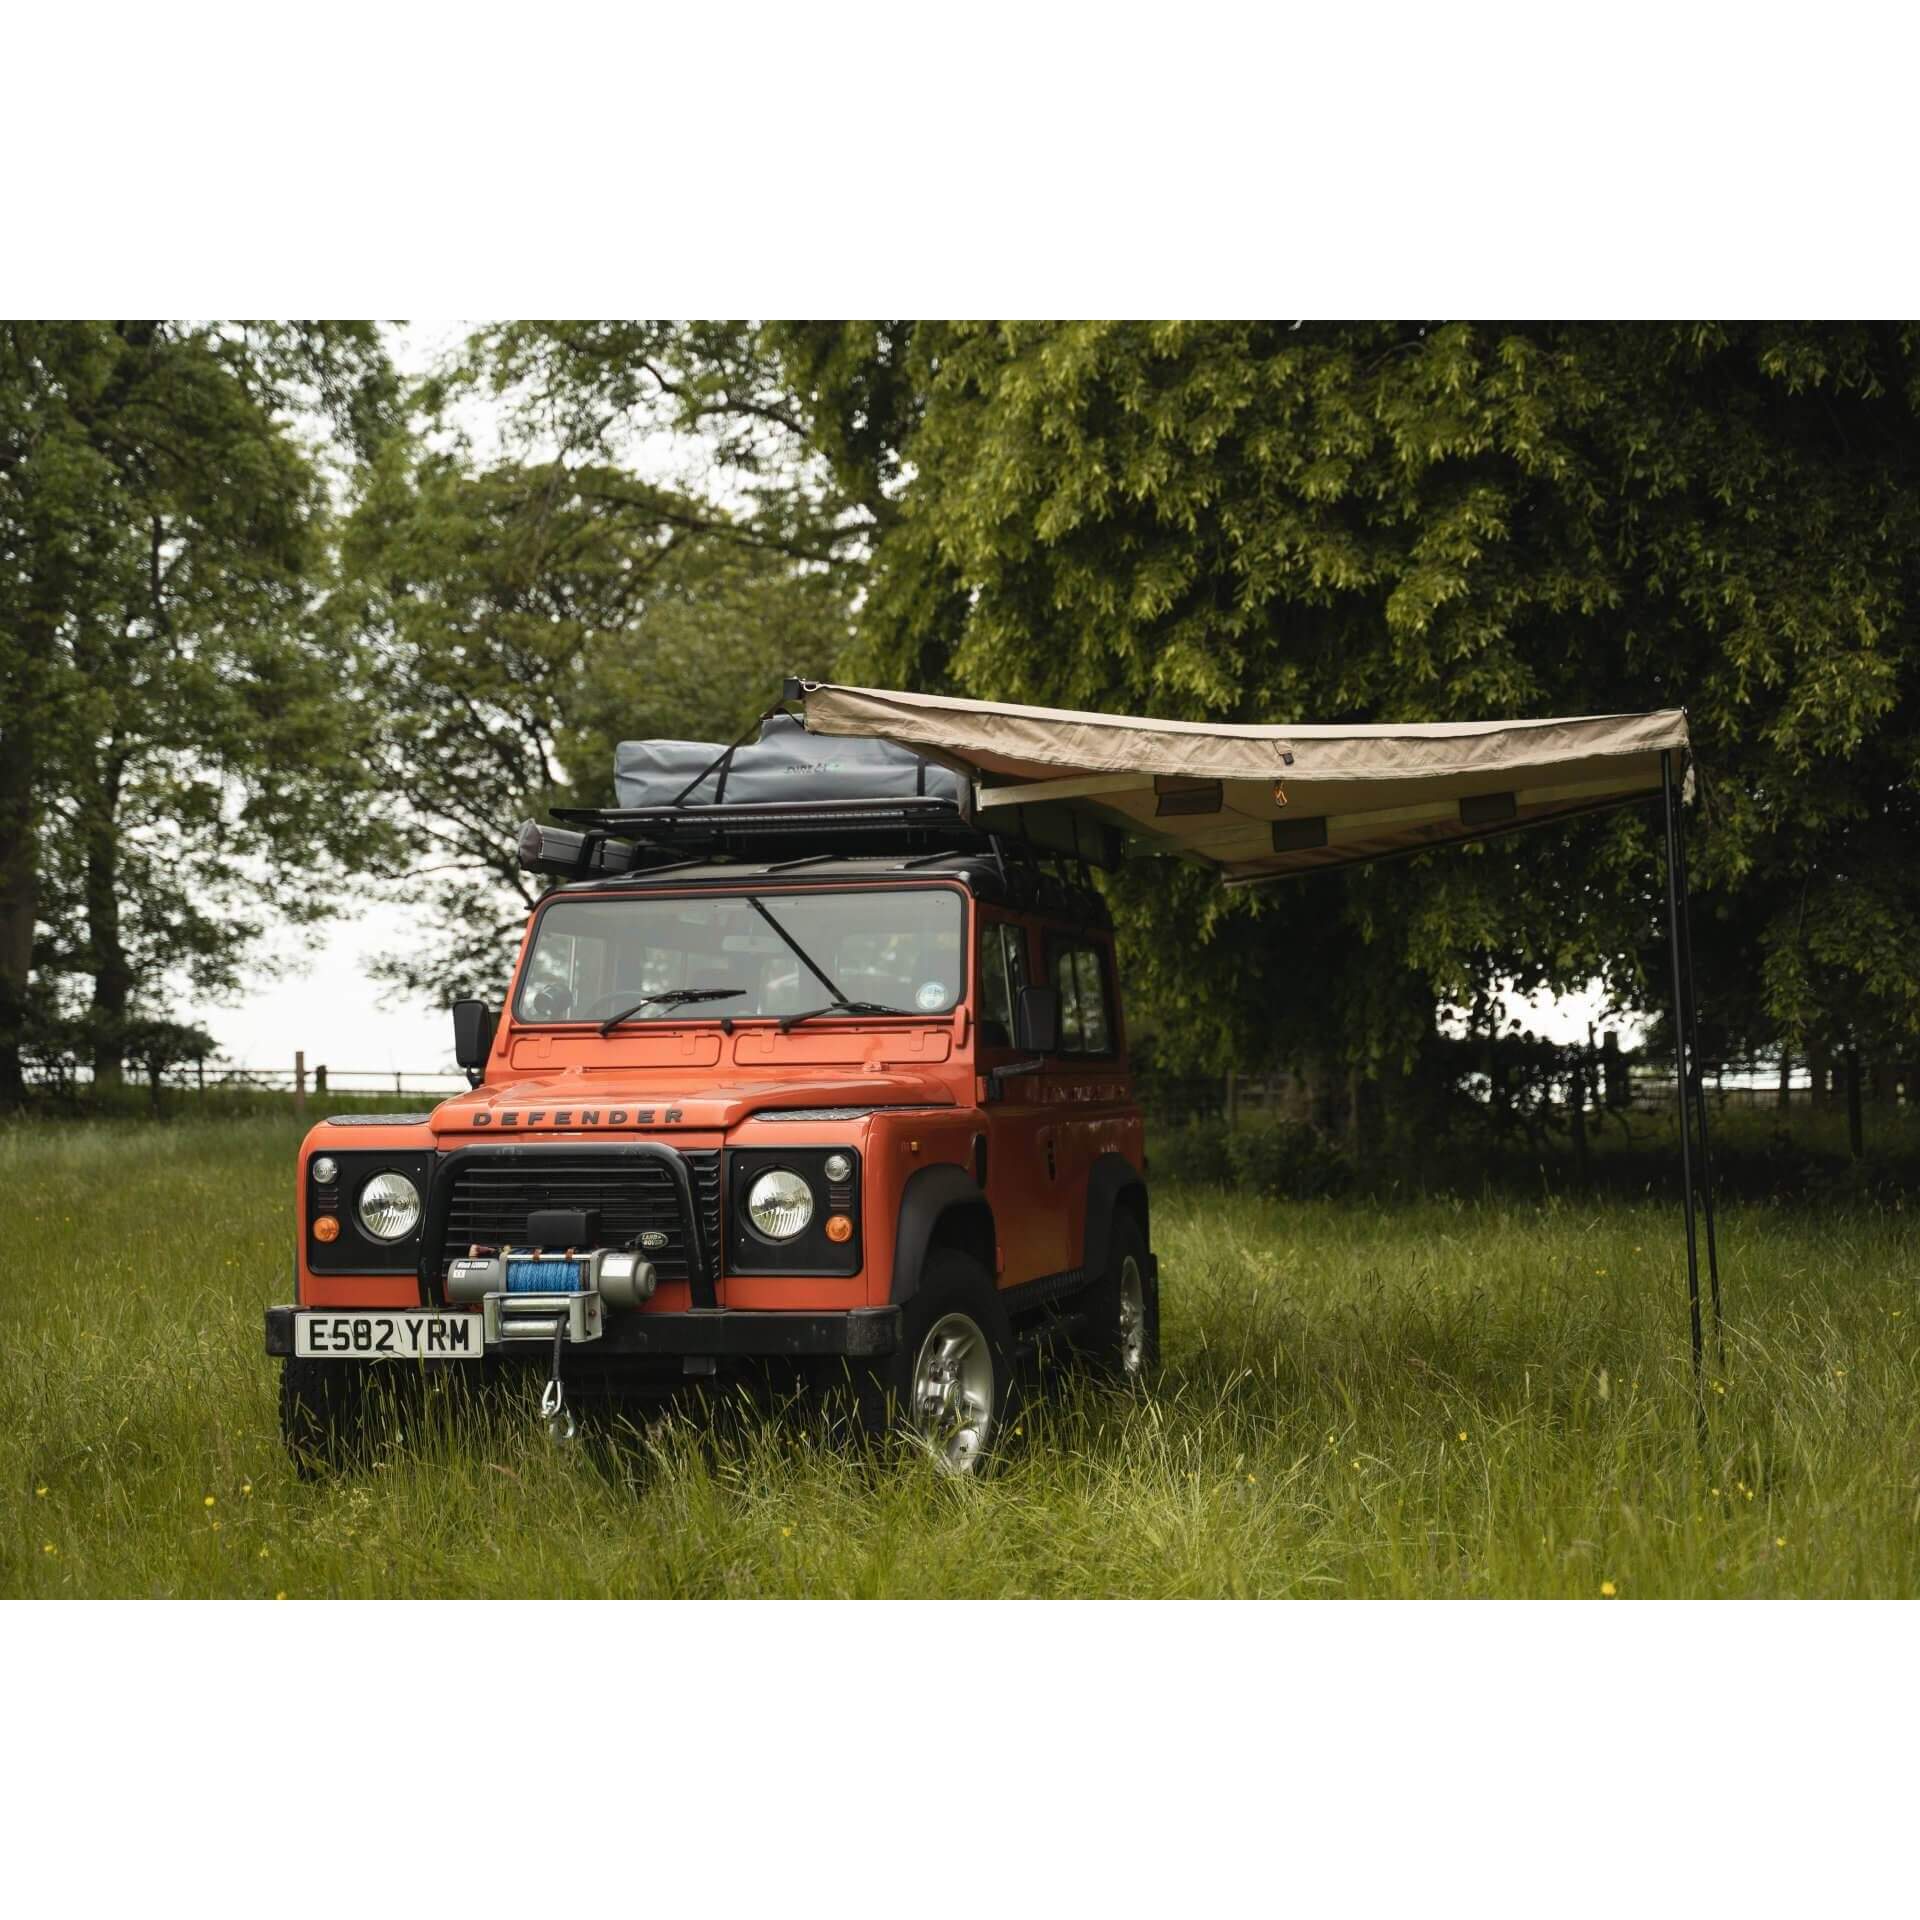 180 Sand Yellow Expedition Foldout Vehicle Camping Side Awning + Side Walls -  - sold by Direct4x4